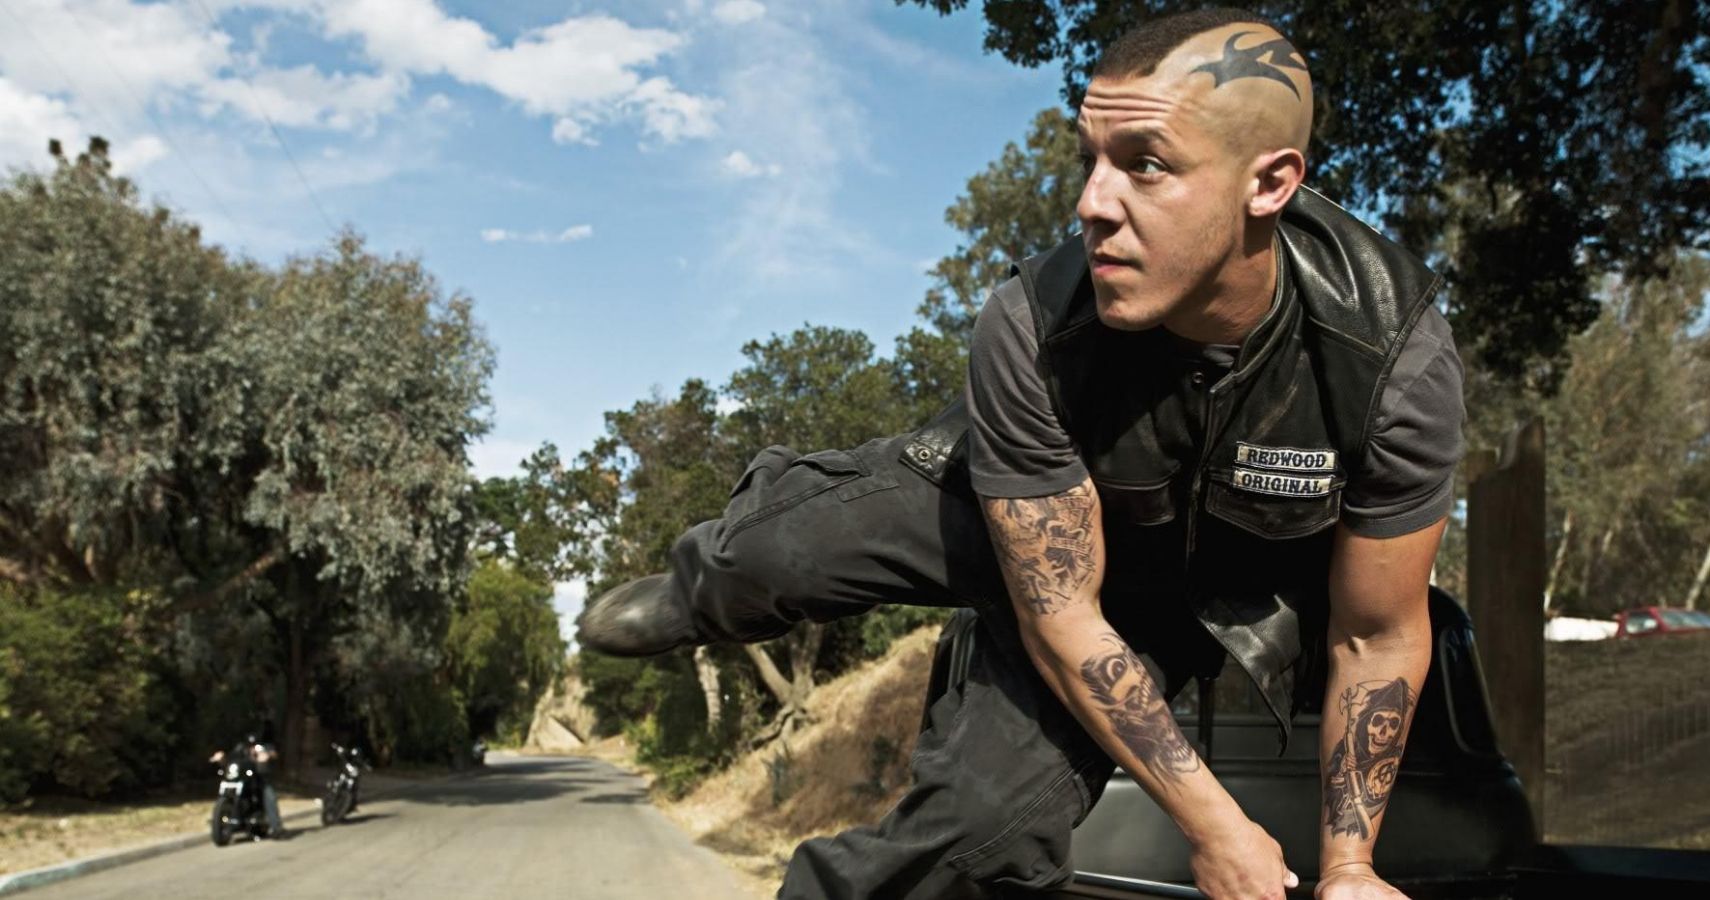 Sons of Anarchy - Theo Rossi as Juice